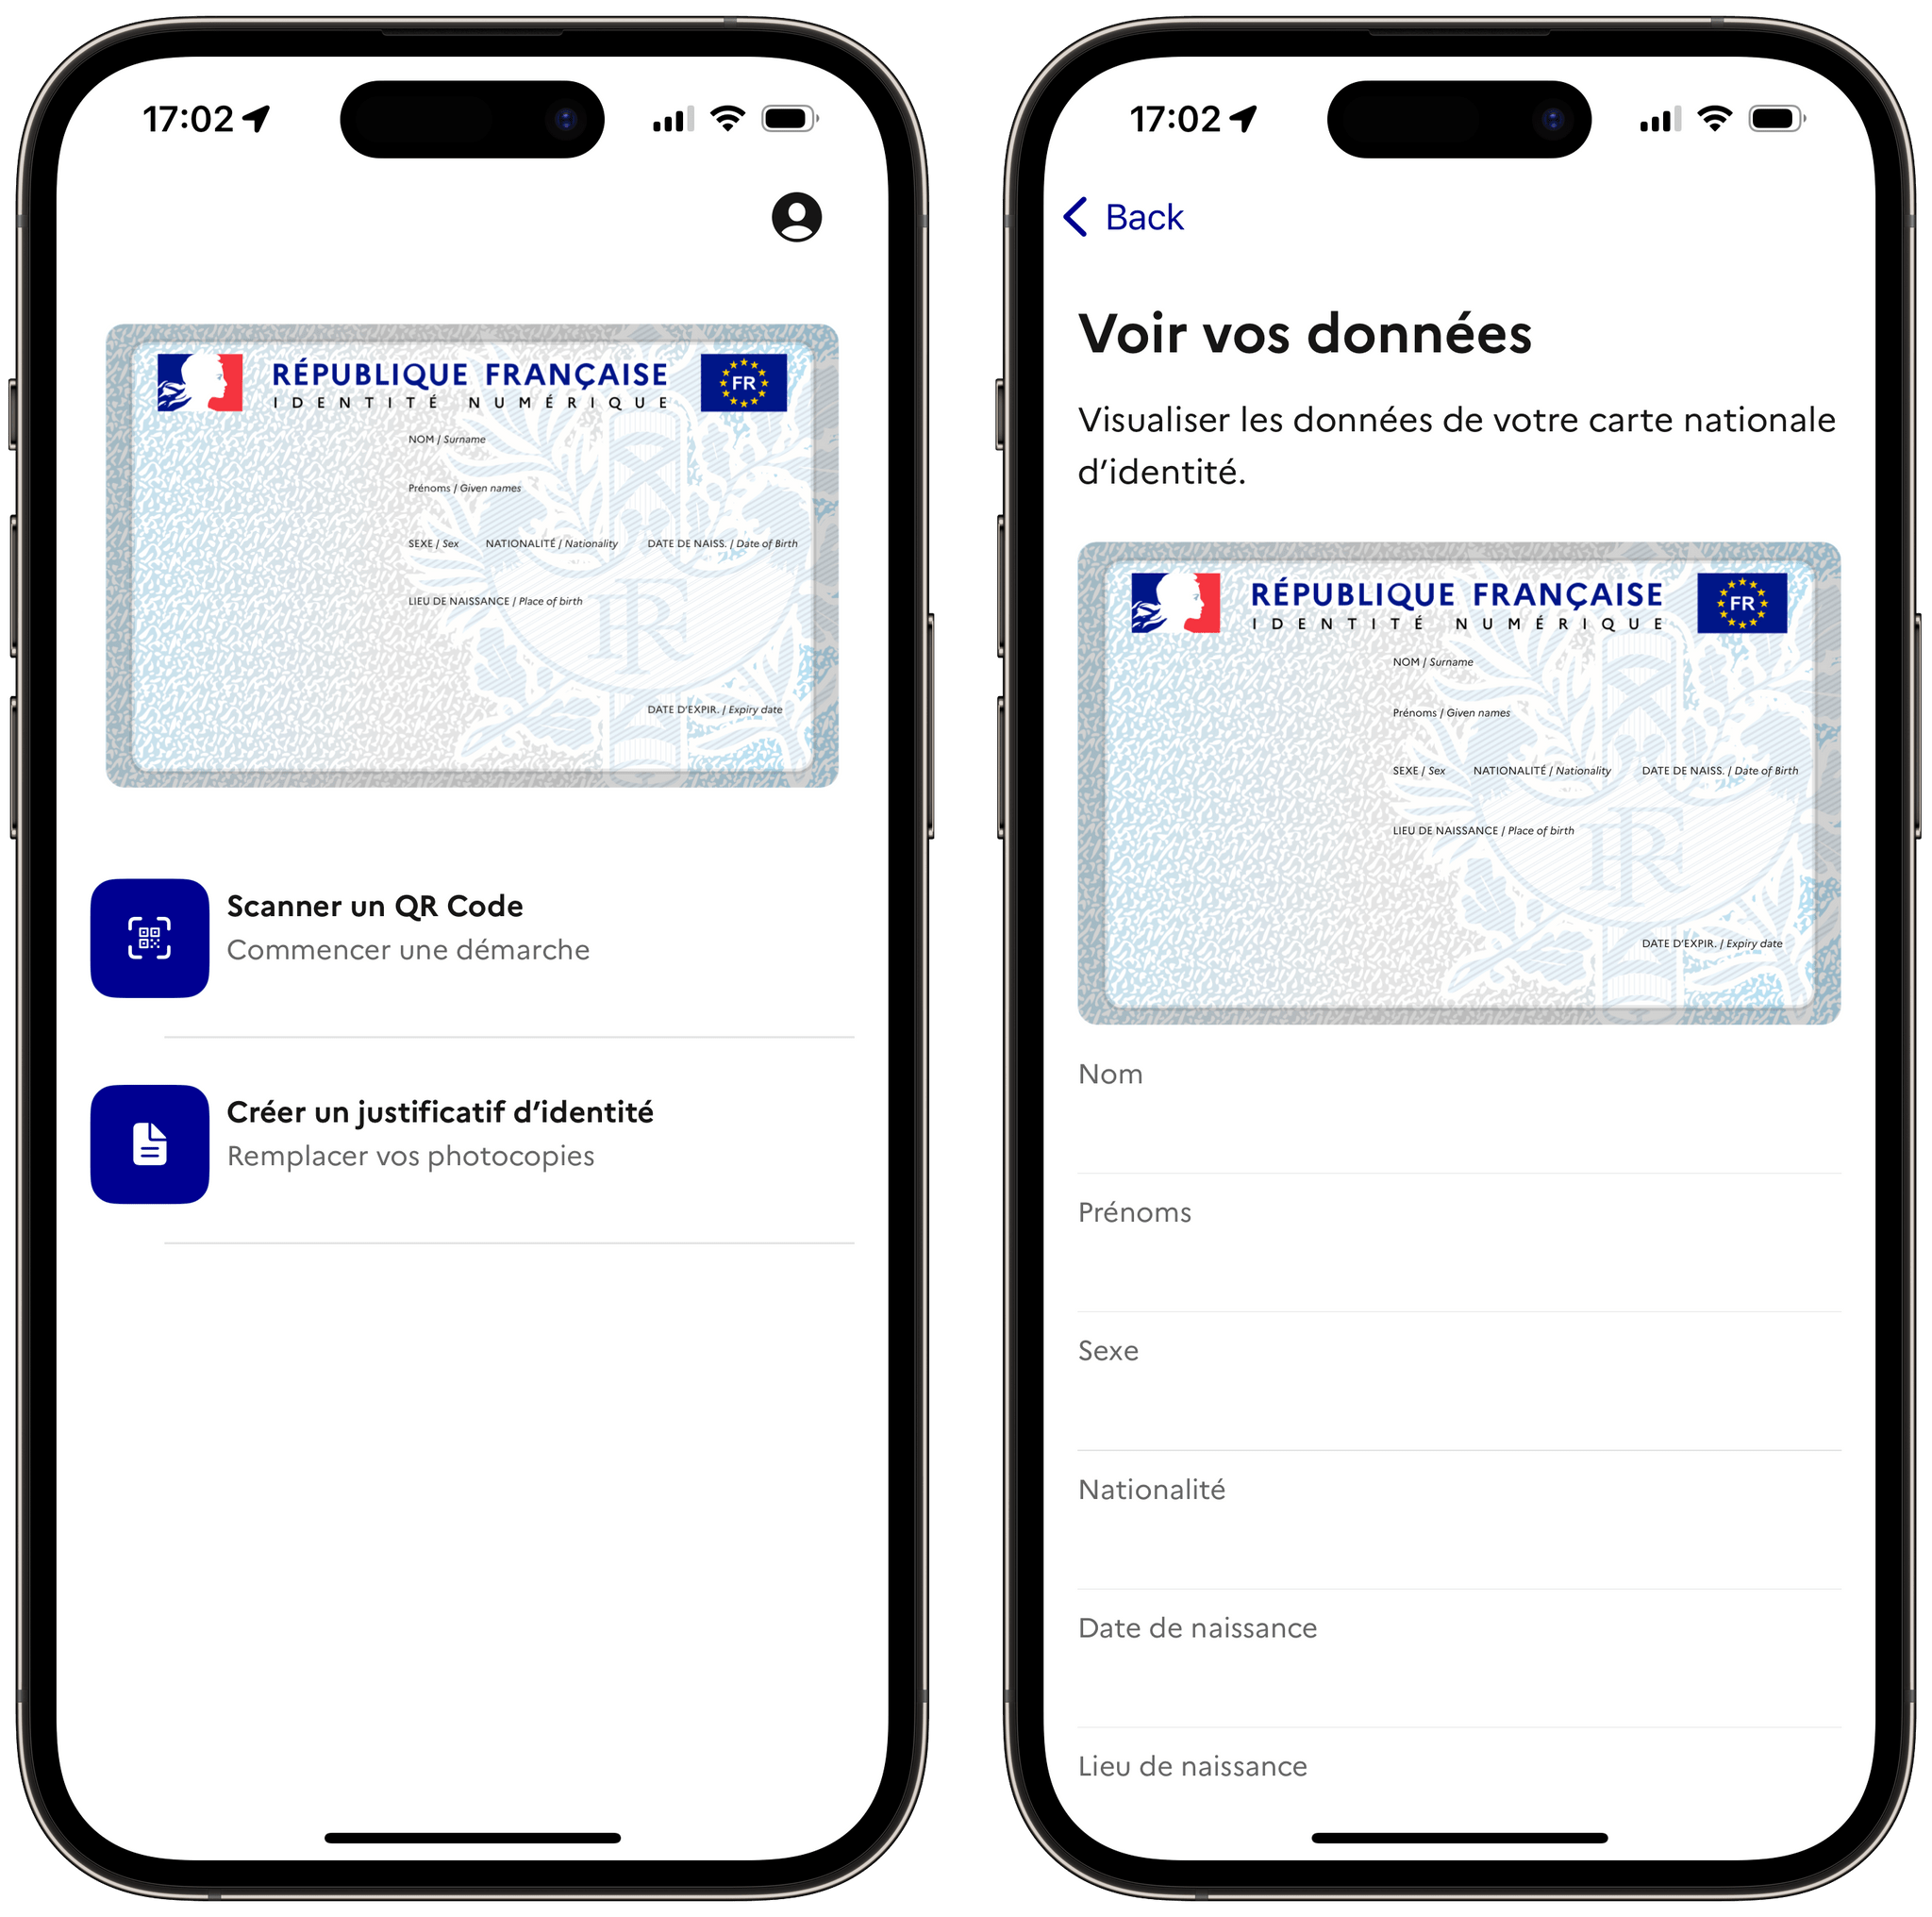 France Identité lets the card holder see all of their personal information on one screen. Note: France Identité automatically strips any personal information from screenshots.